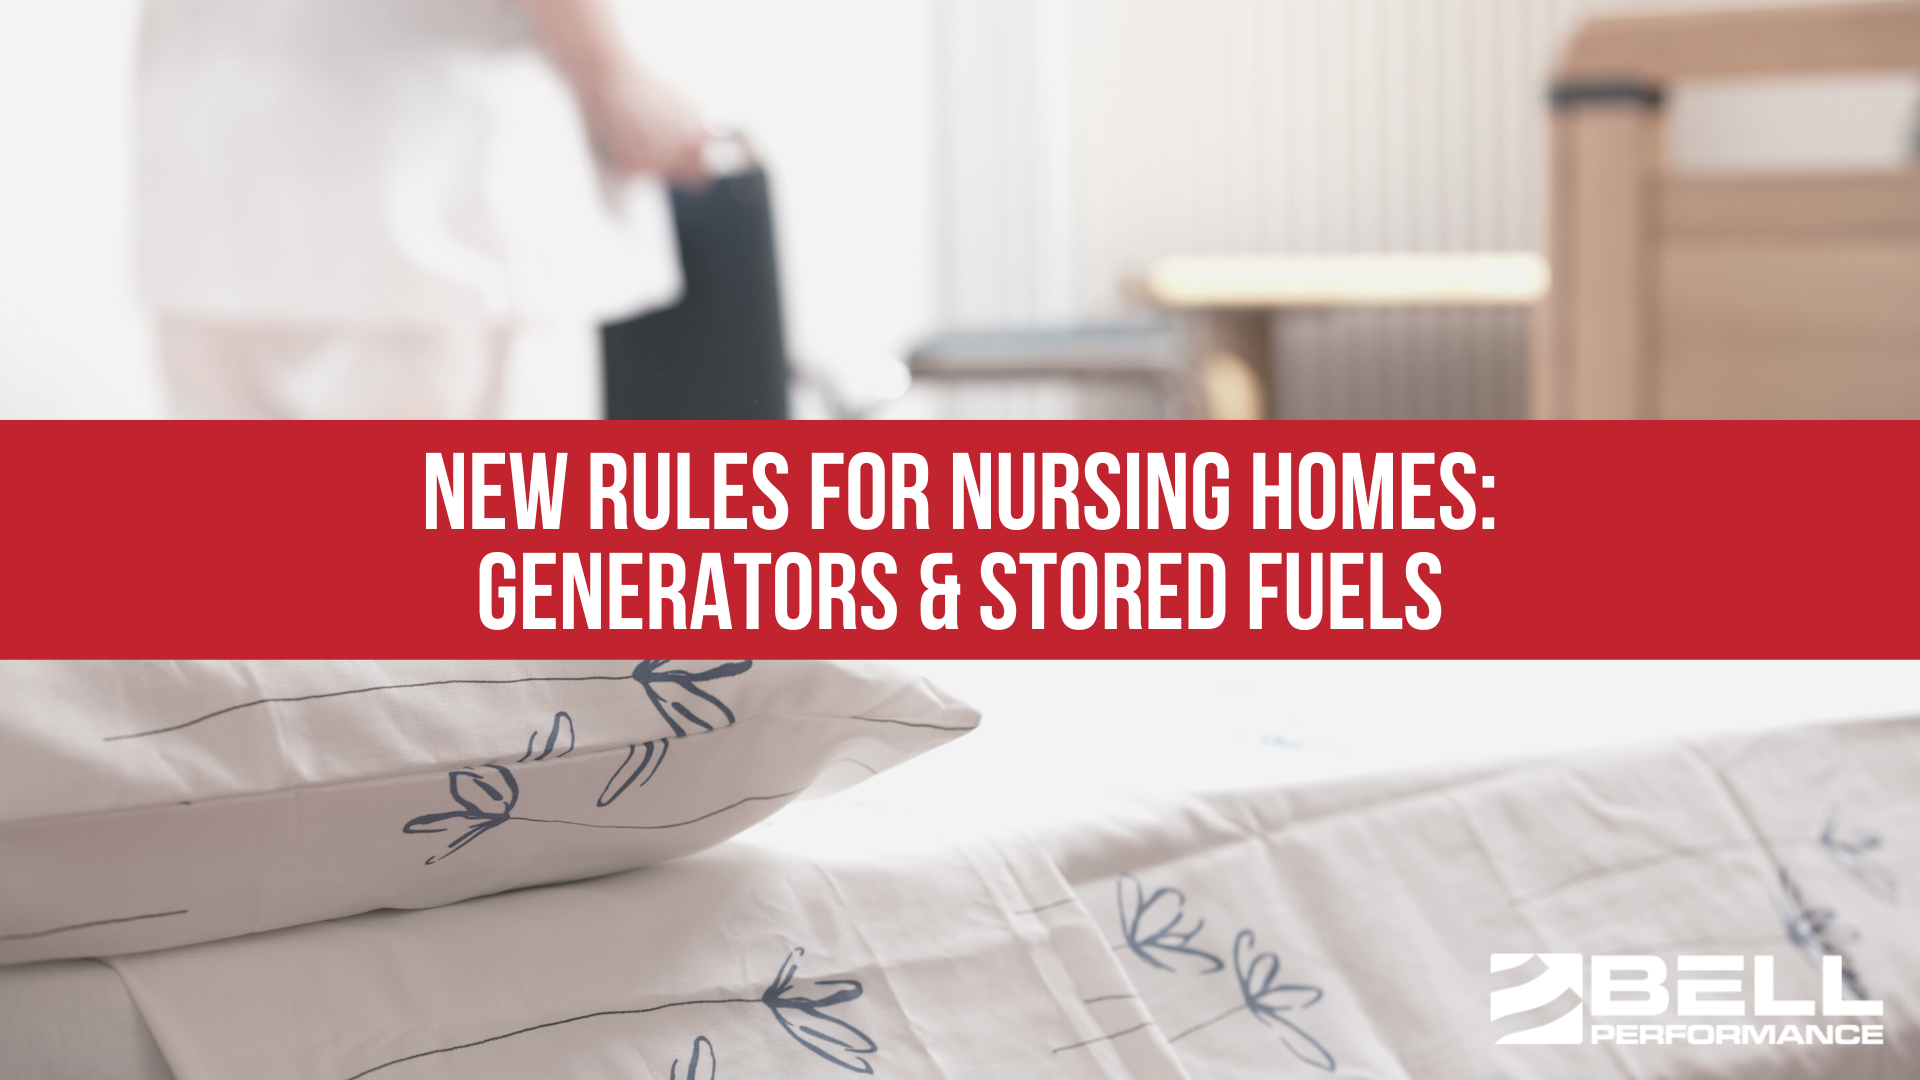 New Rules For Nursing Homes: Generators & Stored Fuels